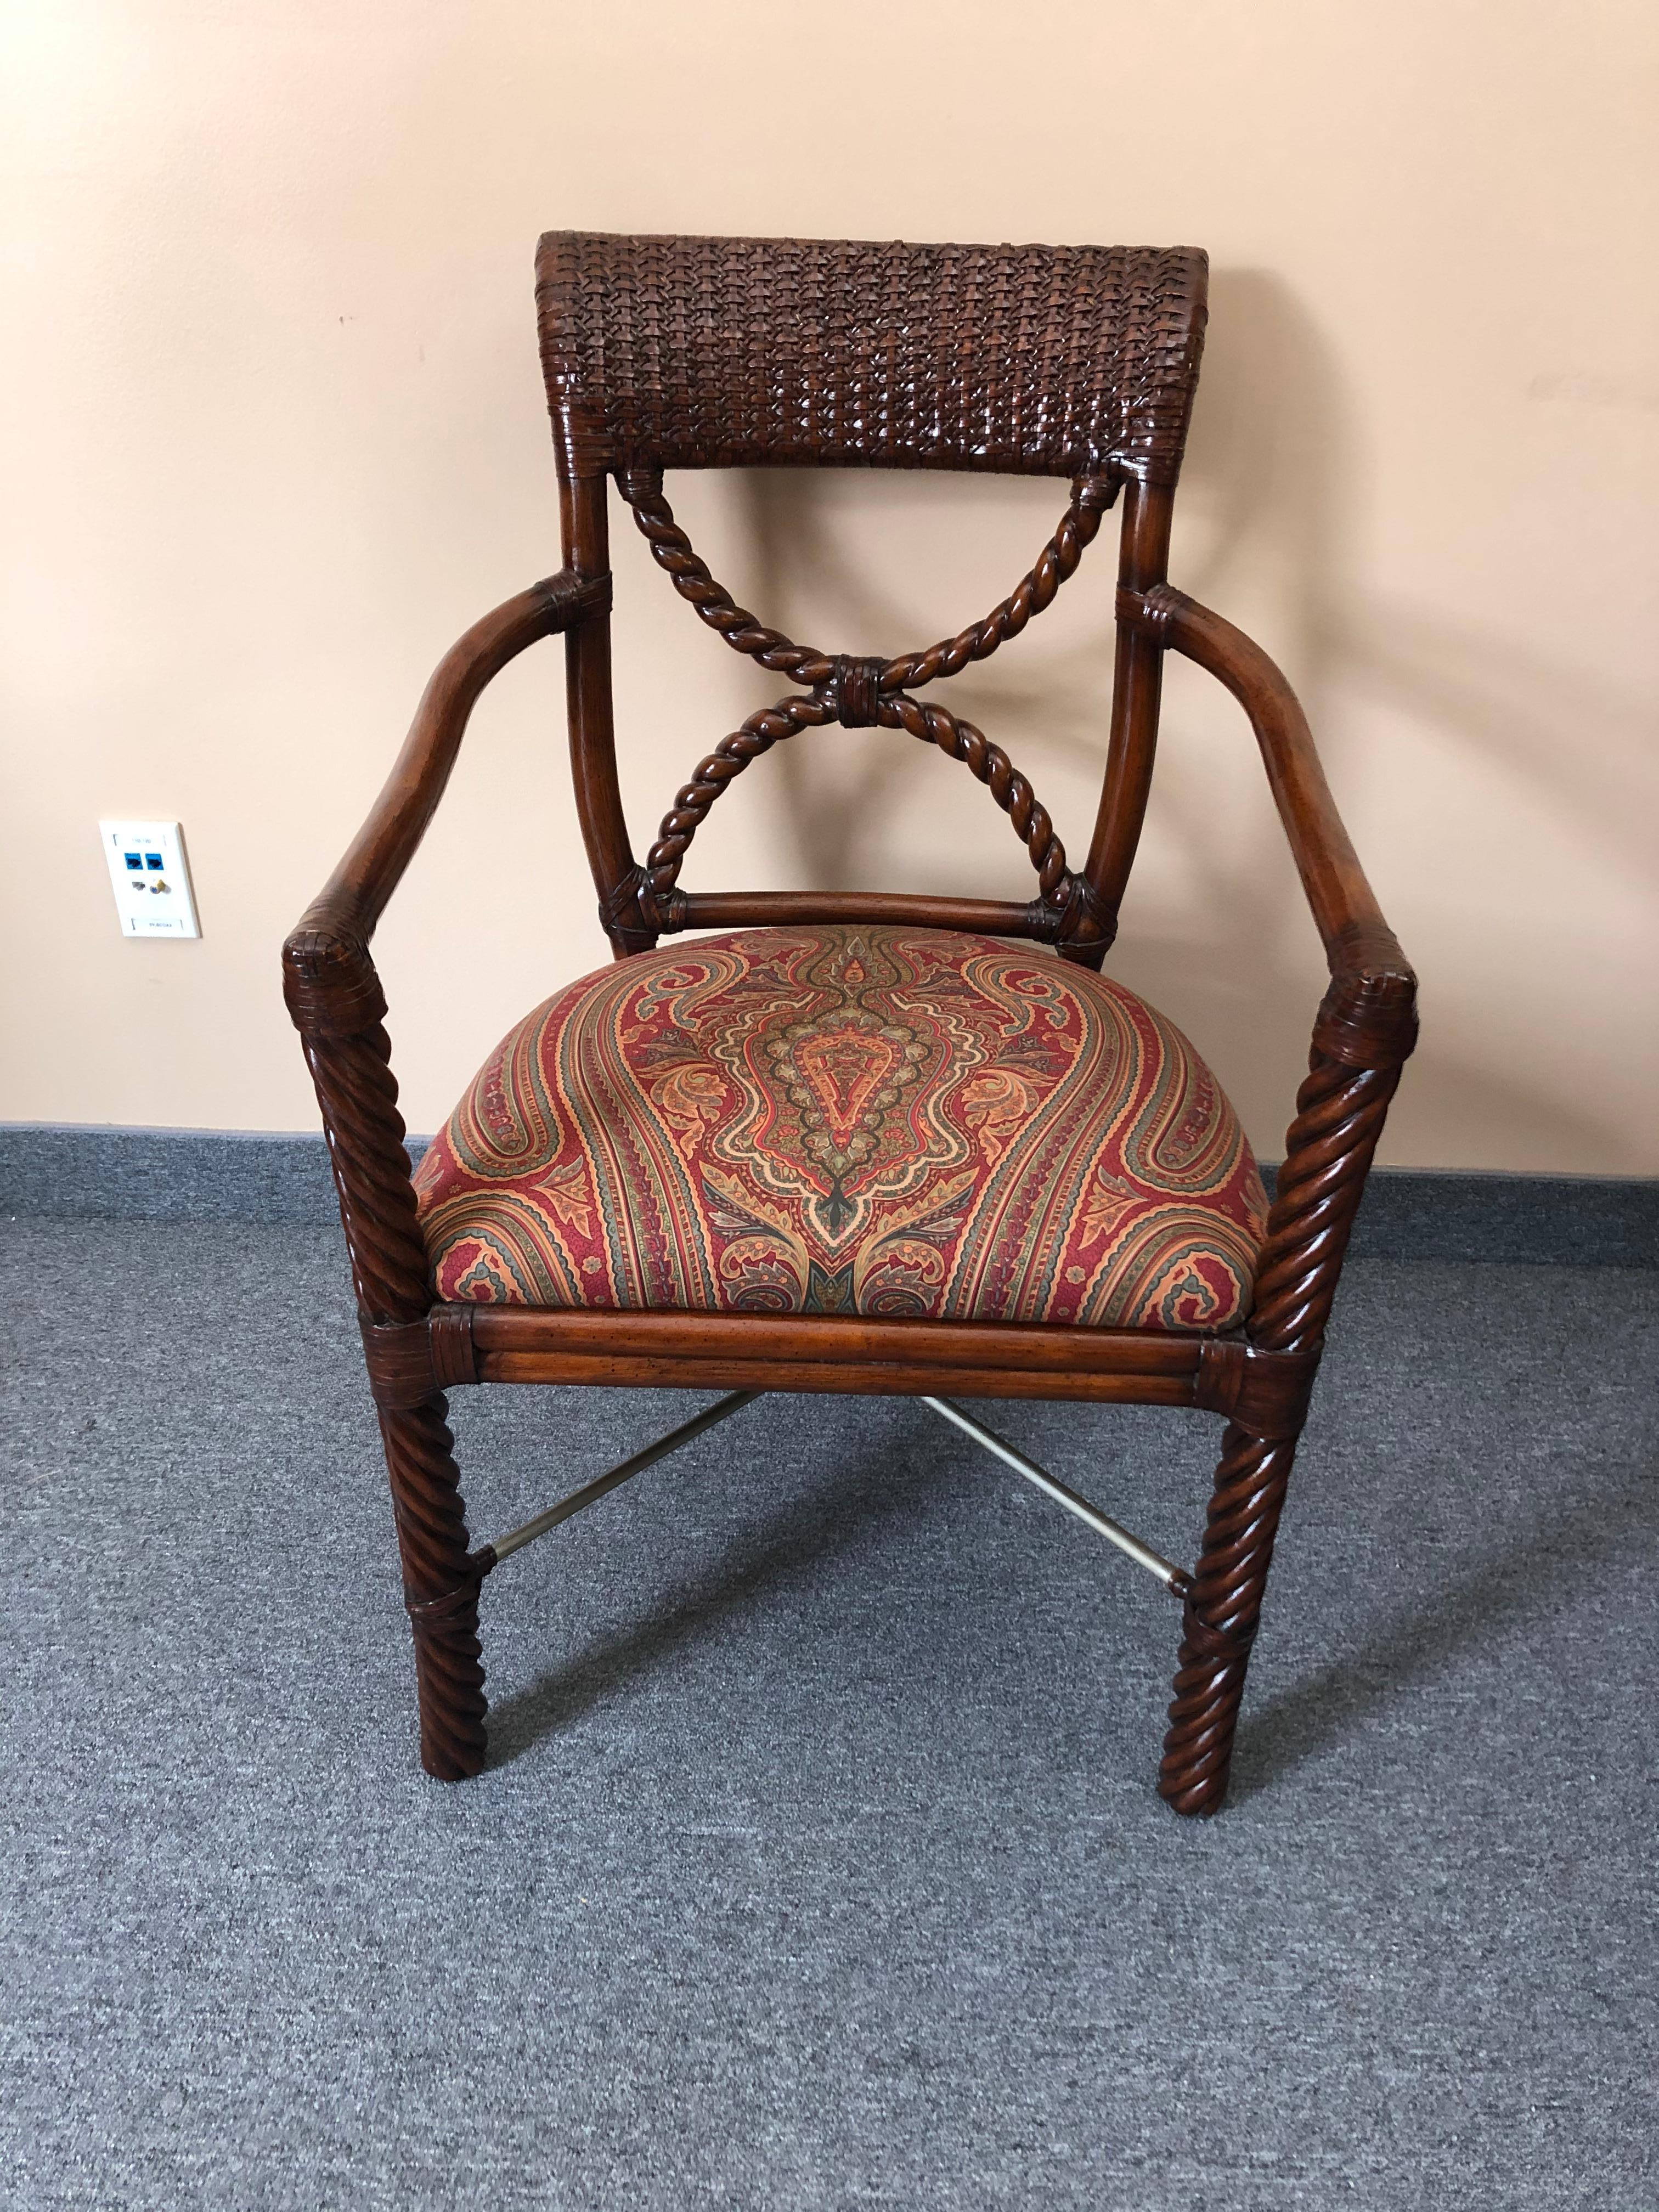 Handsome wood and rattan armchair having twisty carved wood legs and back and wrapped rattan accents. Seat is upholstered in a traditional paisley print. Metal stretchers with rattan wrapped center. Makes a perfect desk chair.
By Lecor Furniture